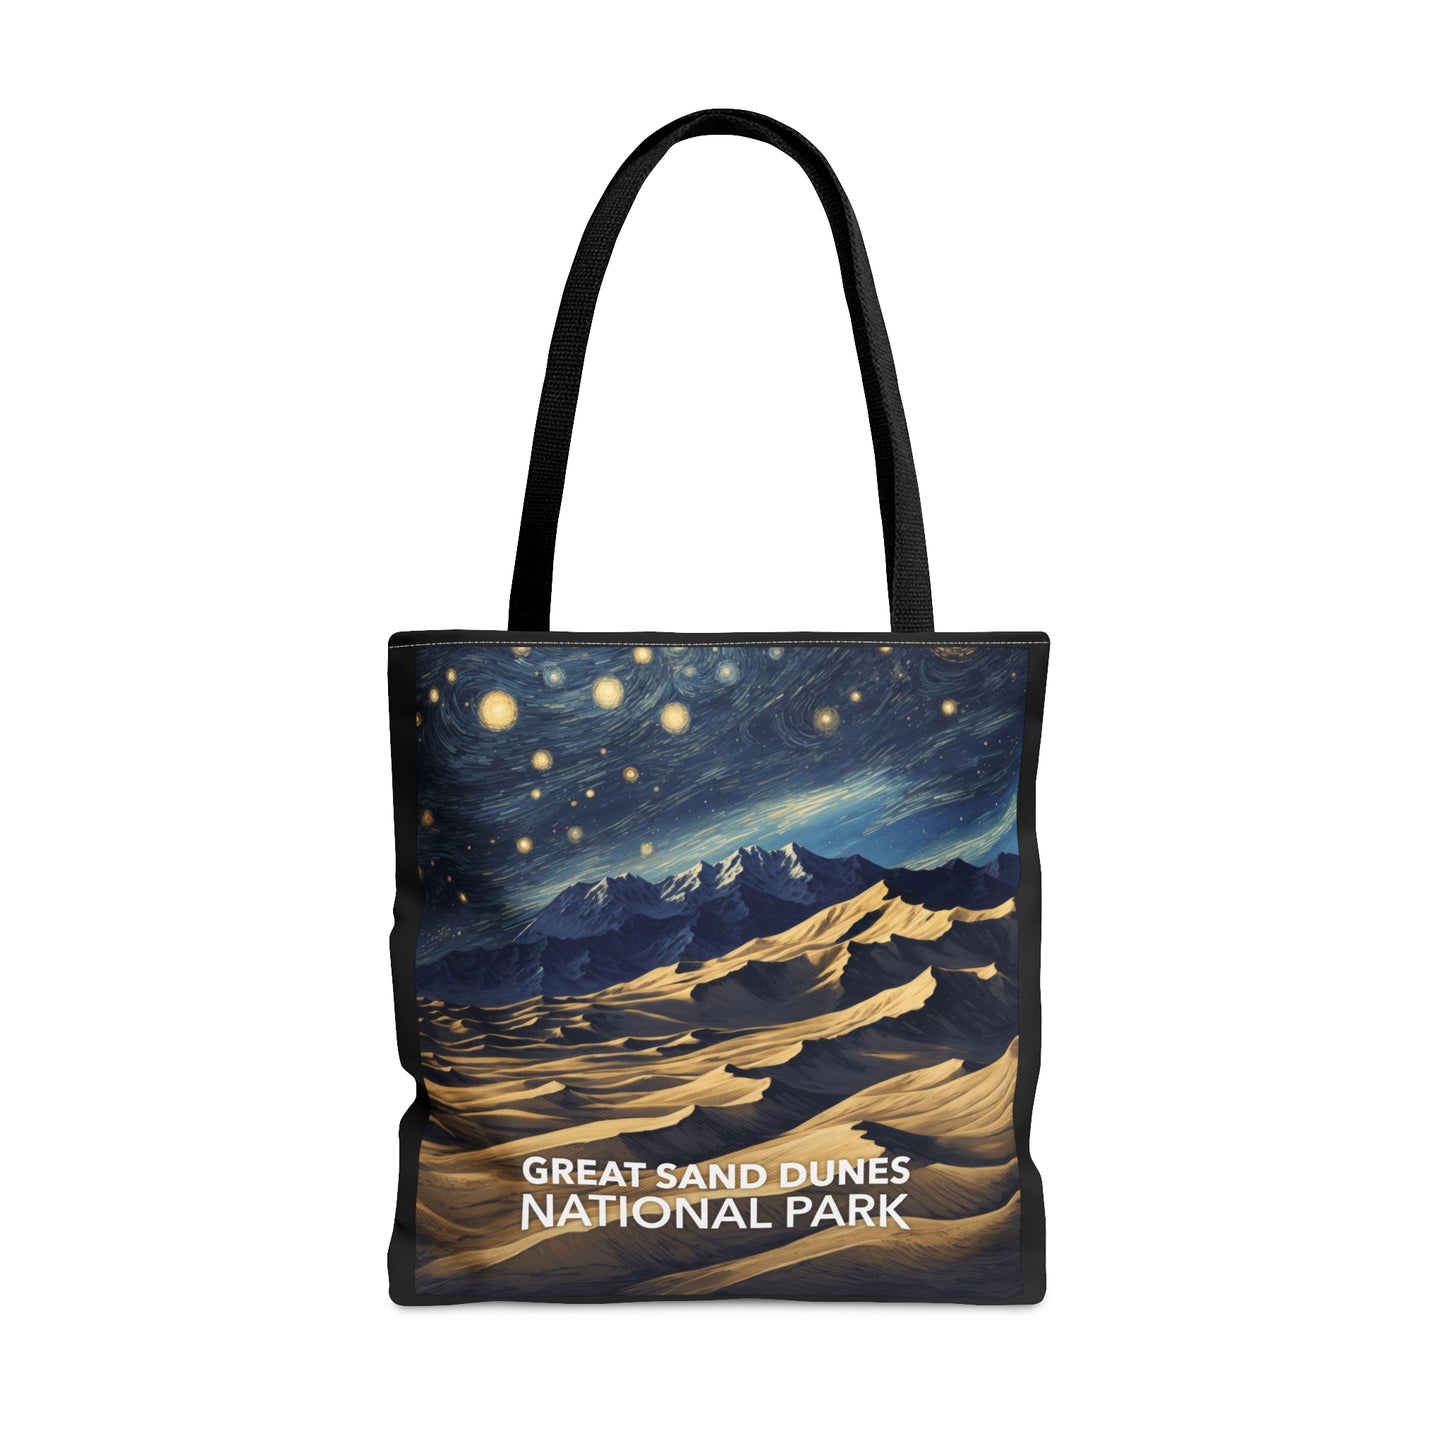 Great Sand Dunes National Park Tote Bag - The Starry Night